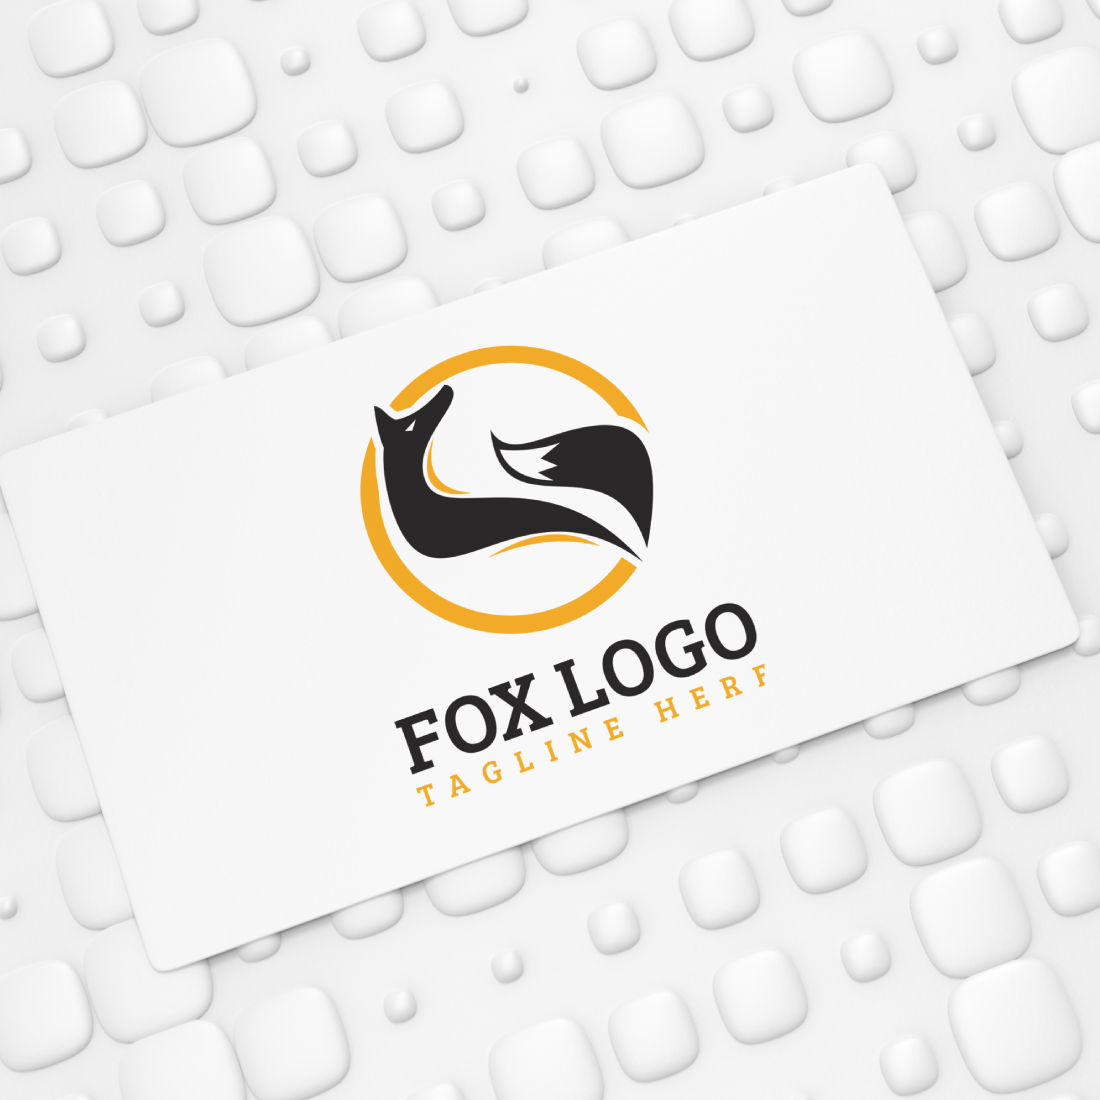 Business card preview with logo.